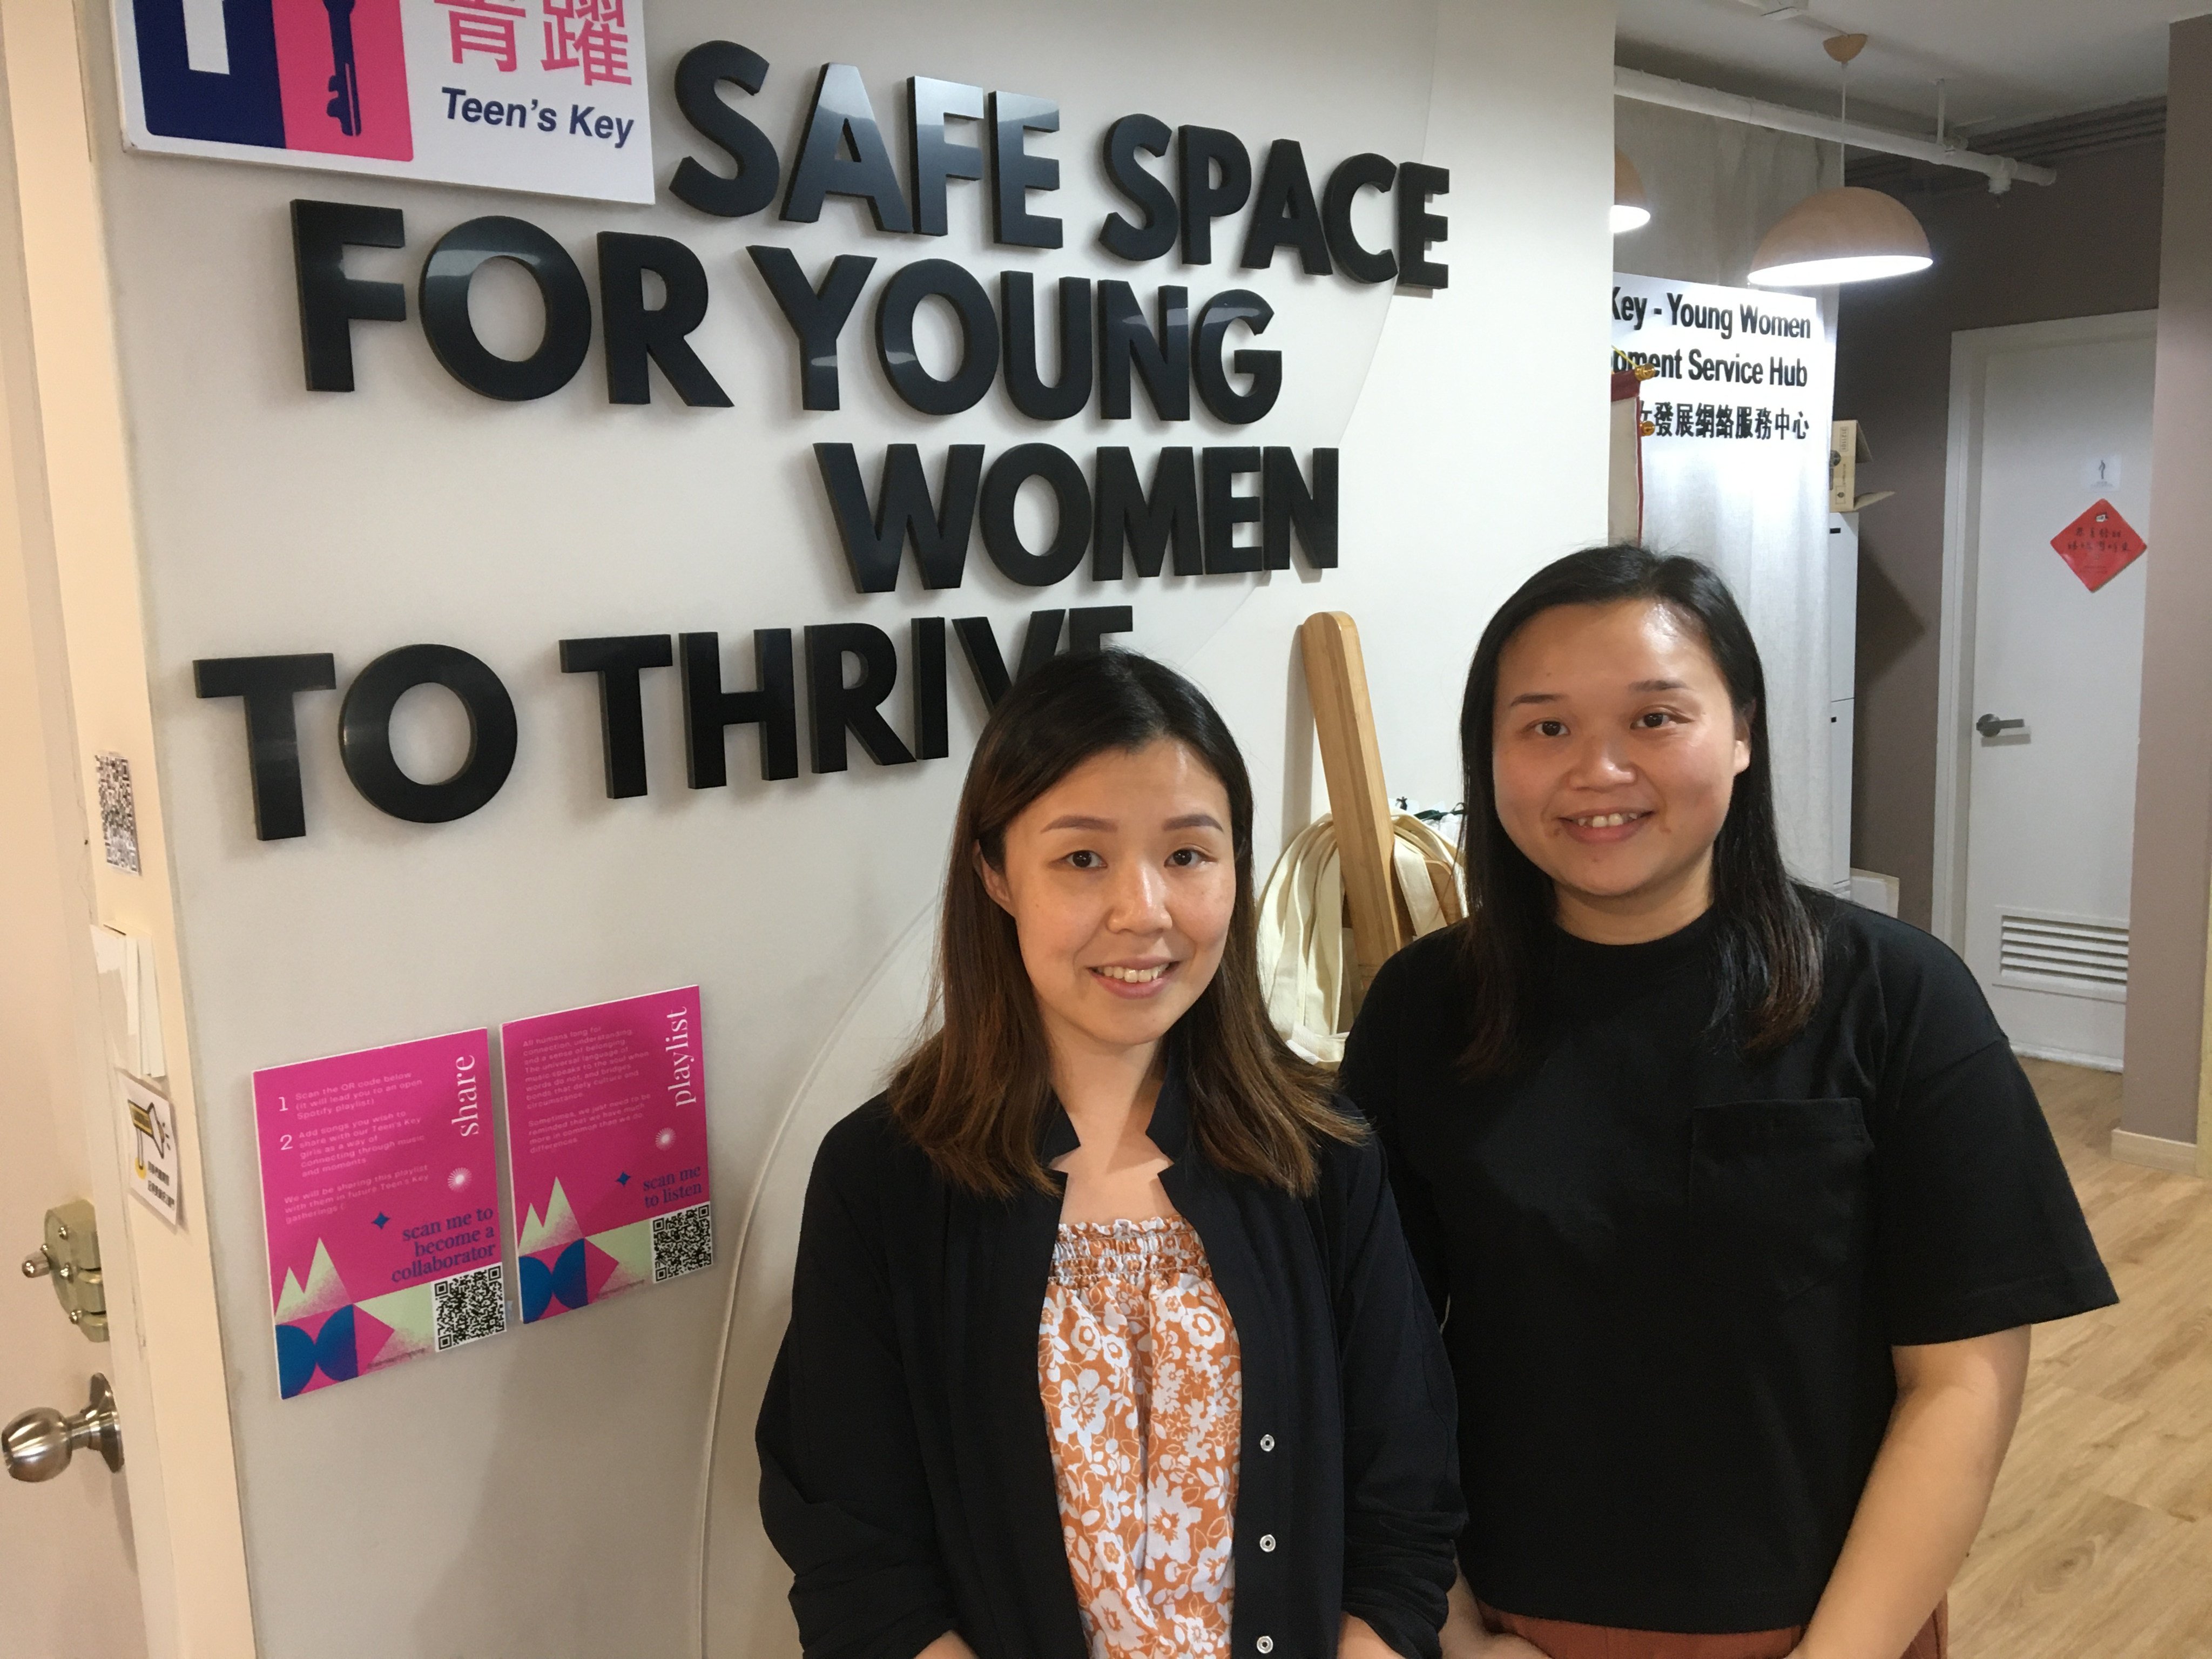 Teen’s Key head of resource development Rachel Chow (left) and head of service Megan Yik say more needs to be done to prevent teen pregnancies, sexual violence and harassment. Photo: Cindy Sui